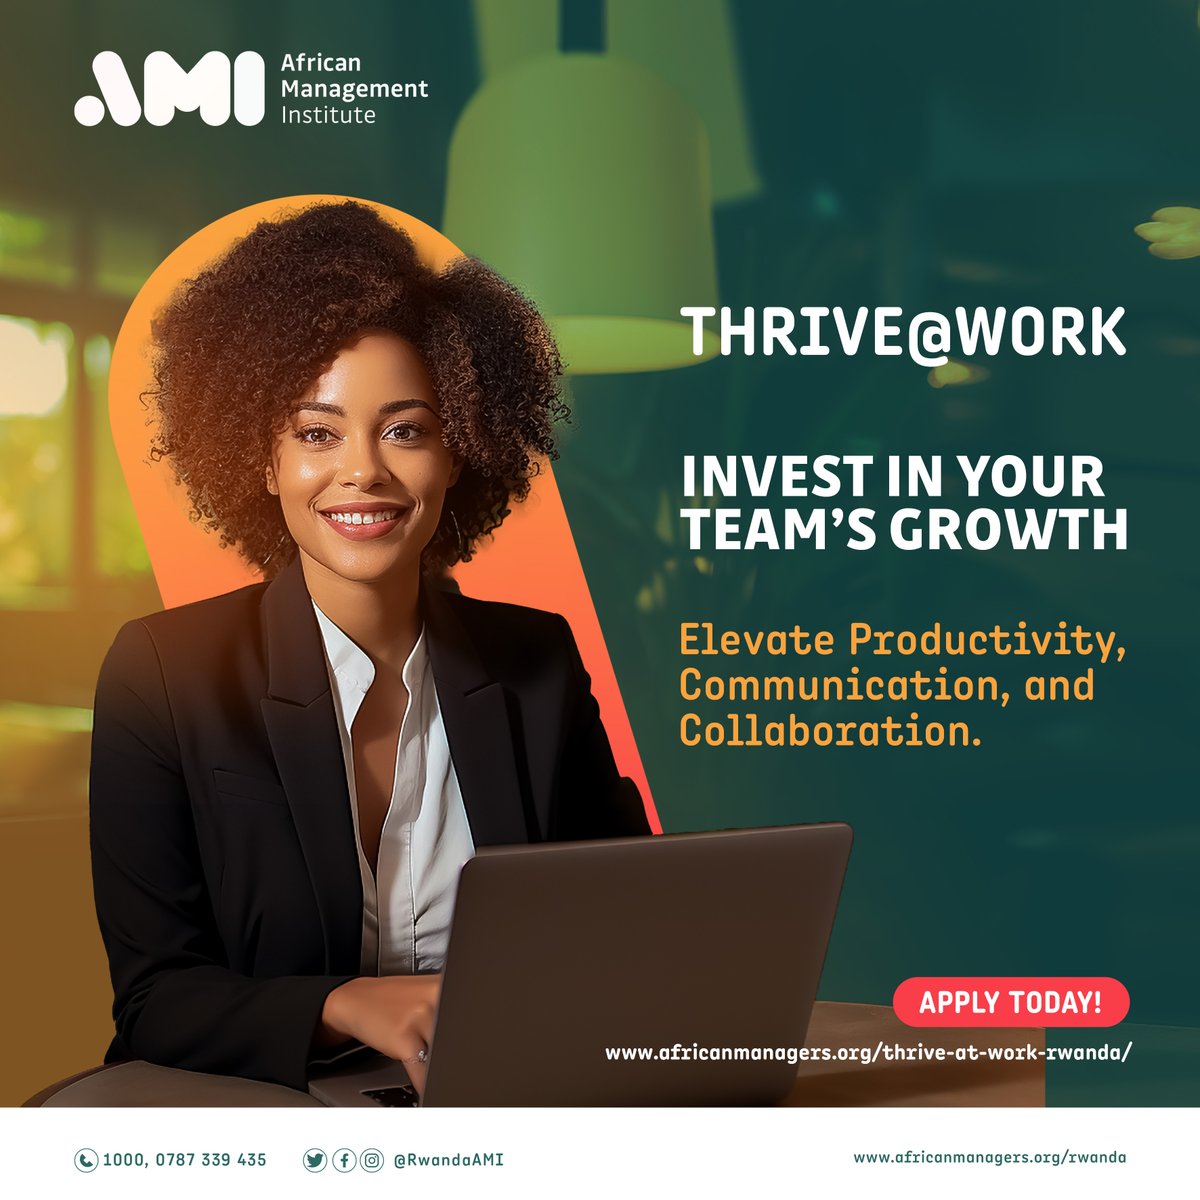 Foster your team's growth and elevate productivity, communication, and collaboration. Ready to take your team to the next level? Apply today for our Thrive@Work program! Apply today: africanmanagers.org/thrive-at-work… #Rwanda #AMIRwanda #AMI